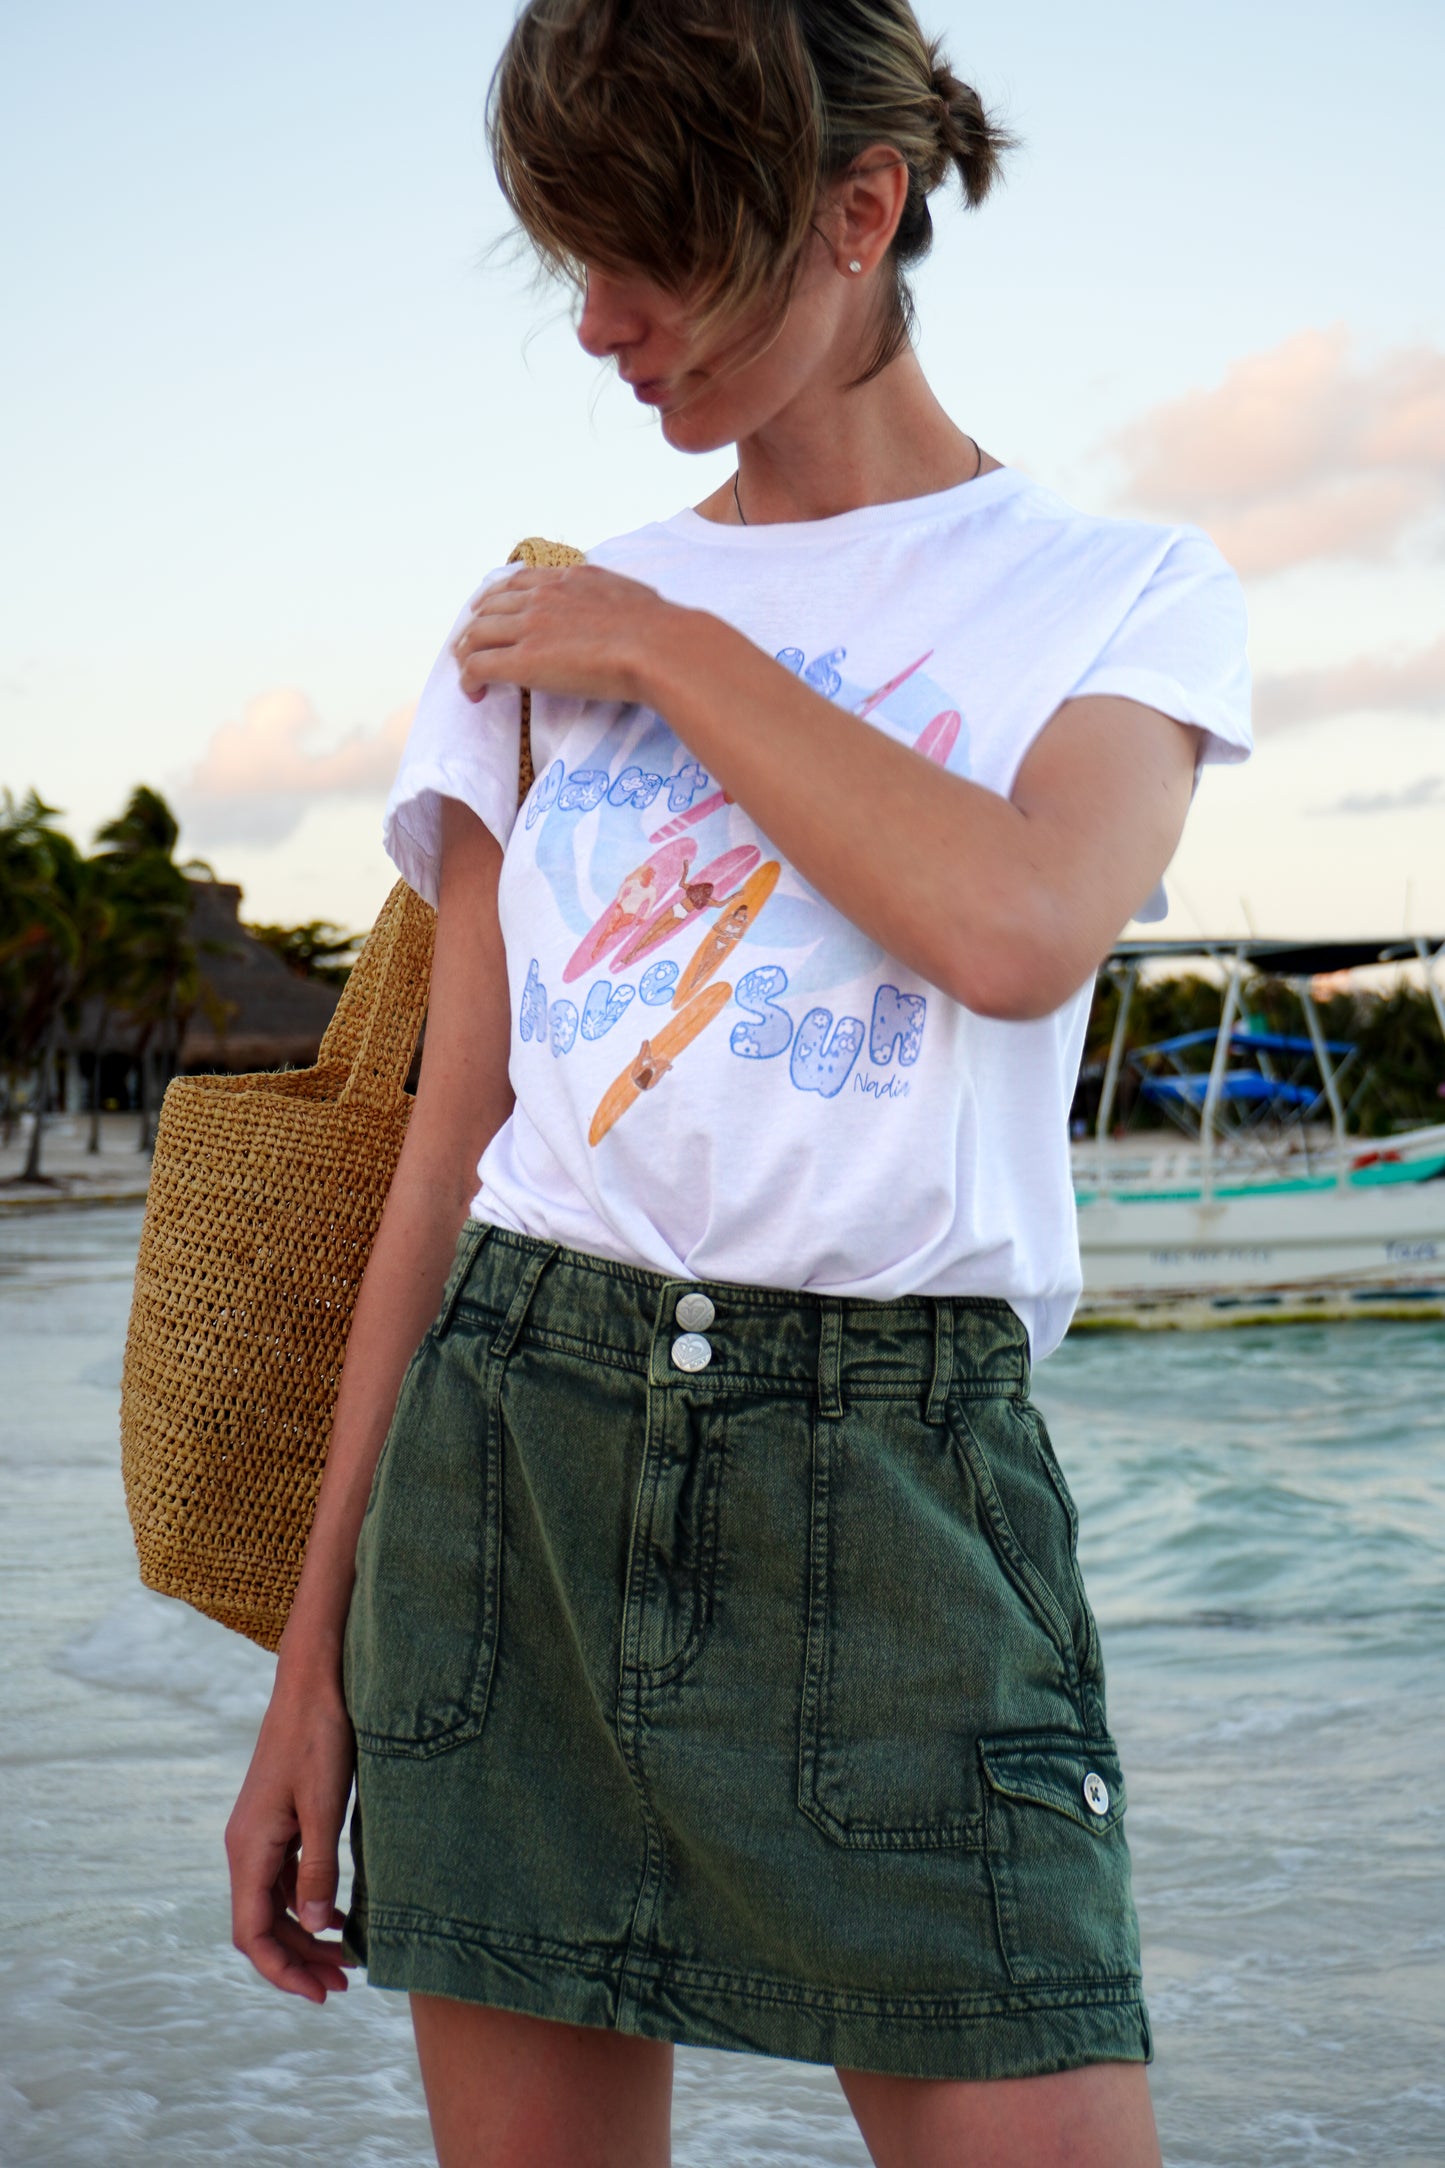 Empowerment meets coastal cool in our 'Girls Just Want to Have Sun' surfer girl tee! This hand-illustrated design features surfer girls living their best lives in the sun. Soft, comfortable, and perfect for beach days or everyday wear